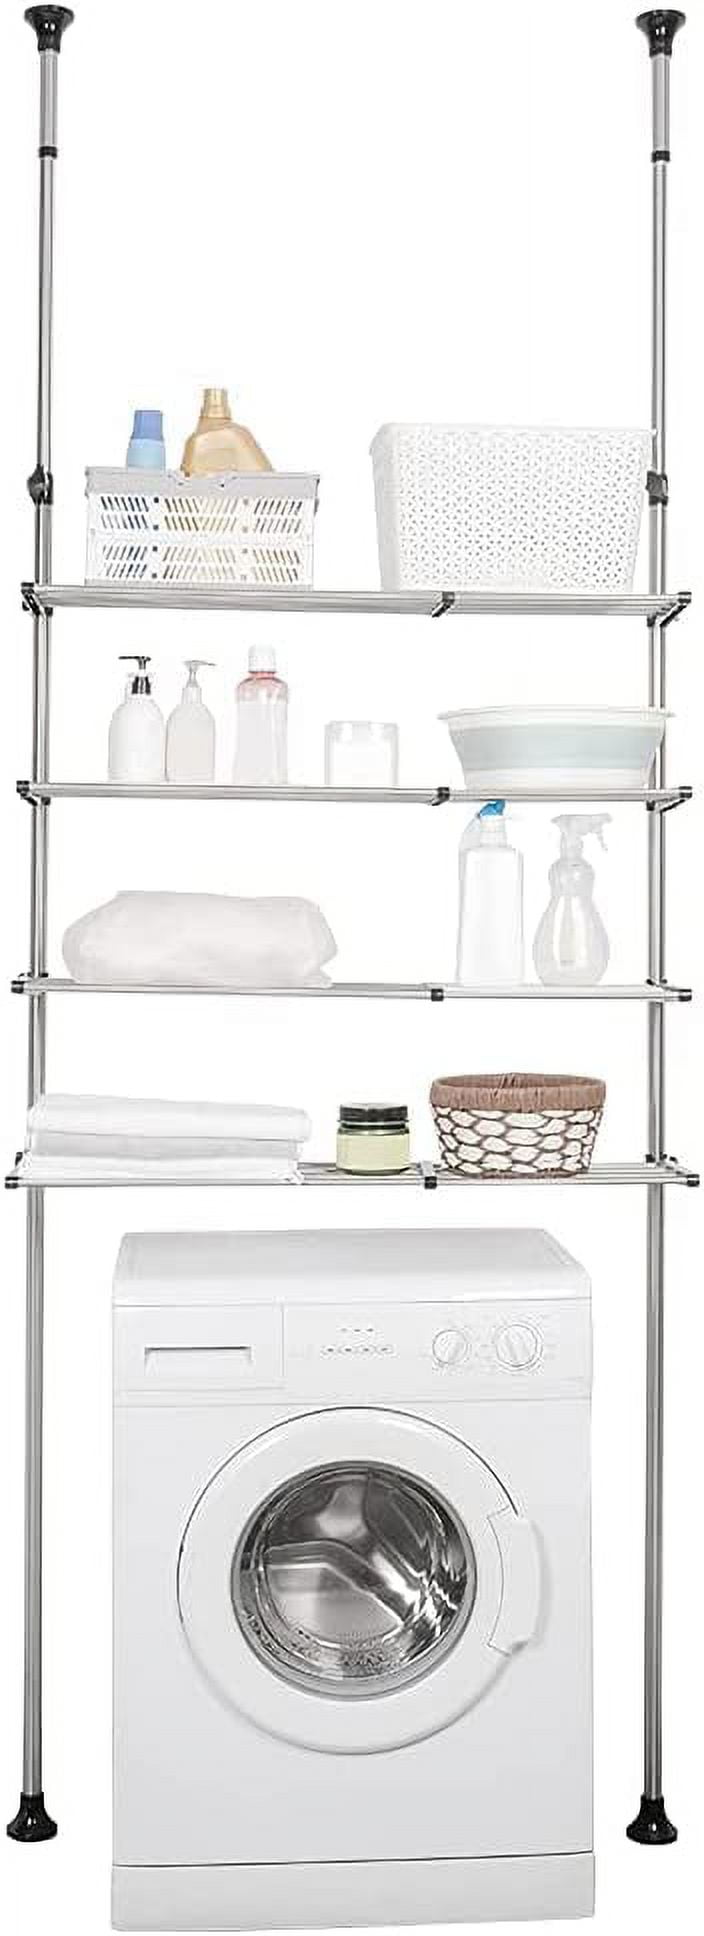 Metal Adjustable Bathroom Shelf Above Washer Expandable Storage Stand Over  Dryer Laundry Unit Organizer Rack Over Toilet White